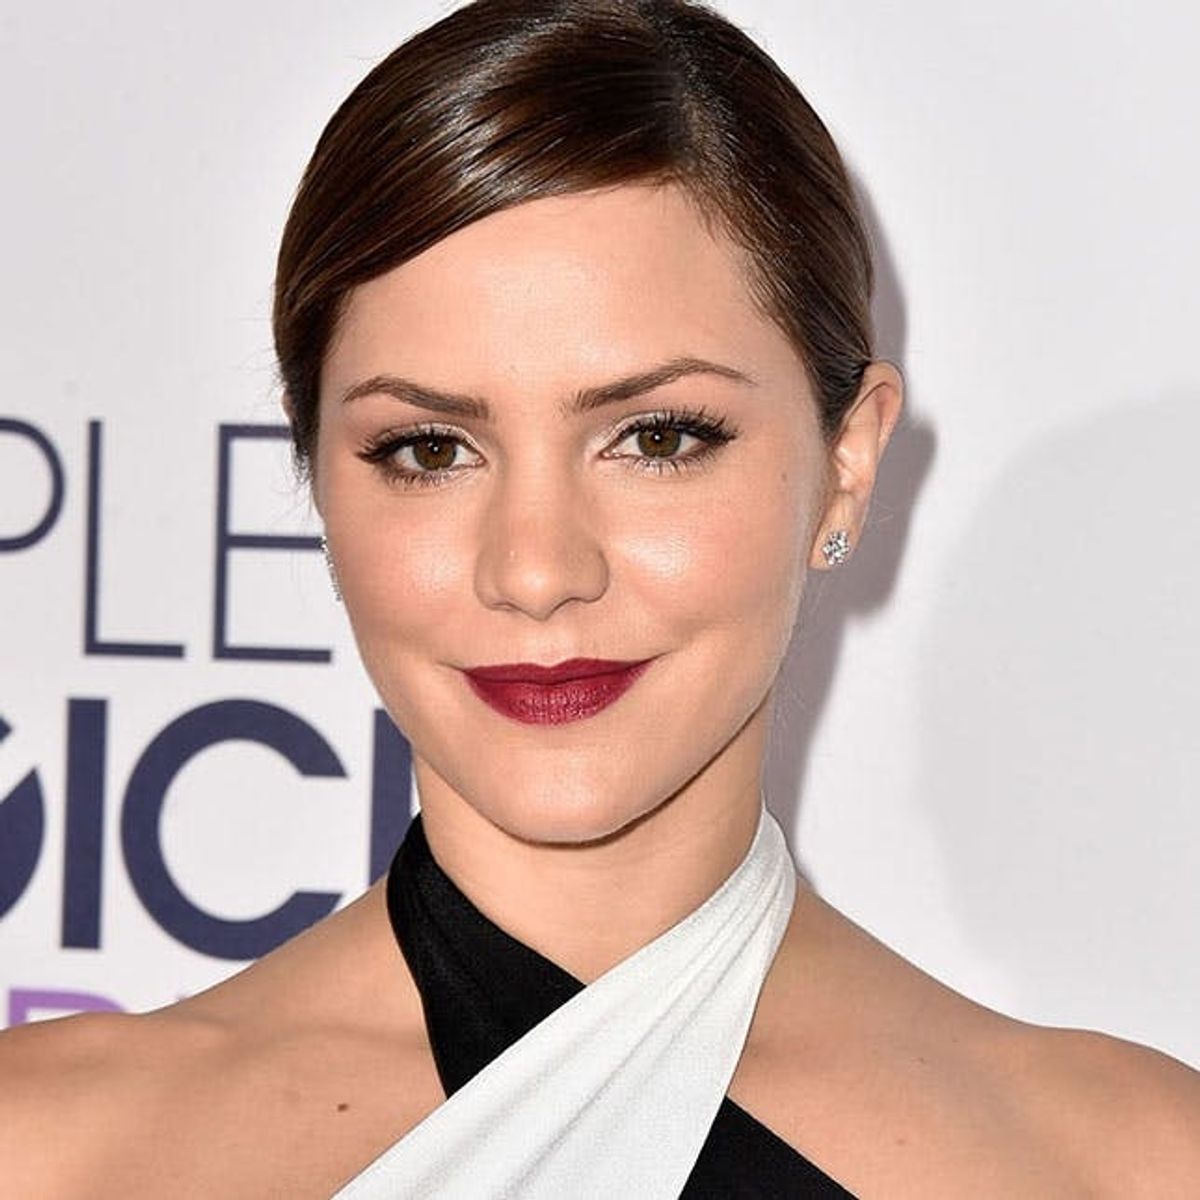 15 Must-Try Beauty Trends from the People’s Choice Awards